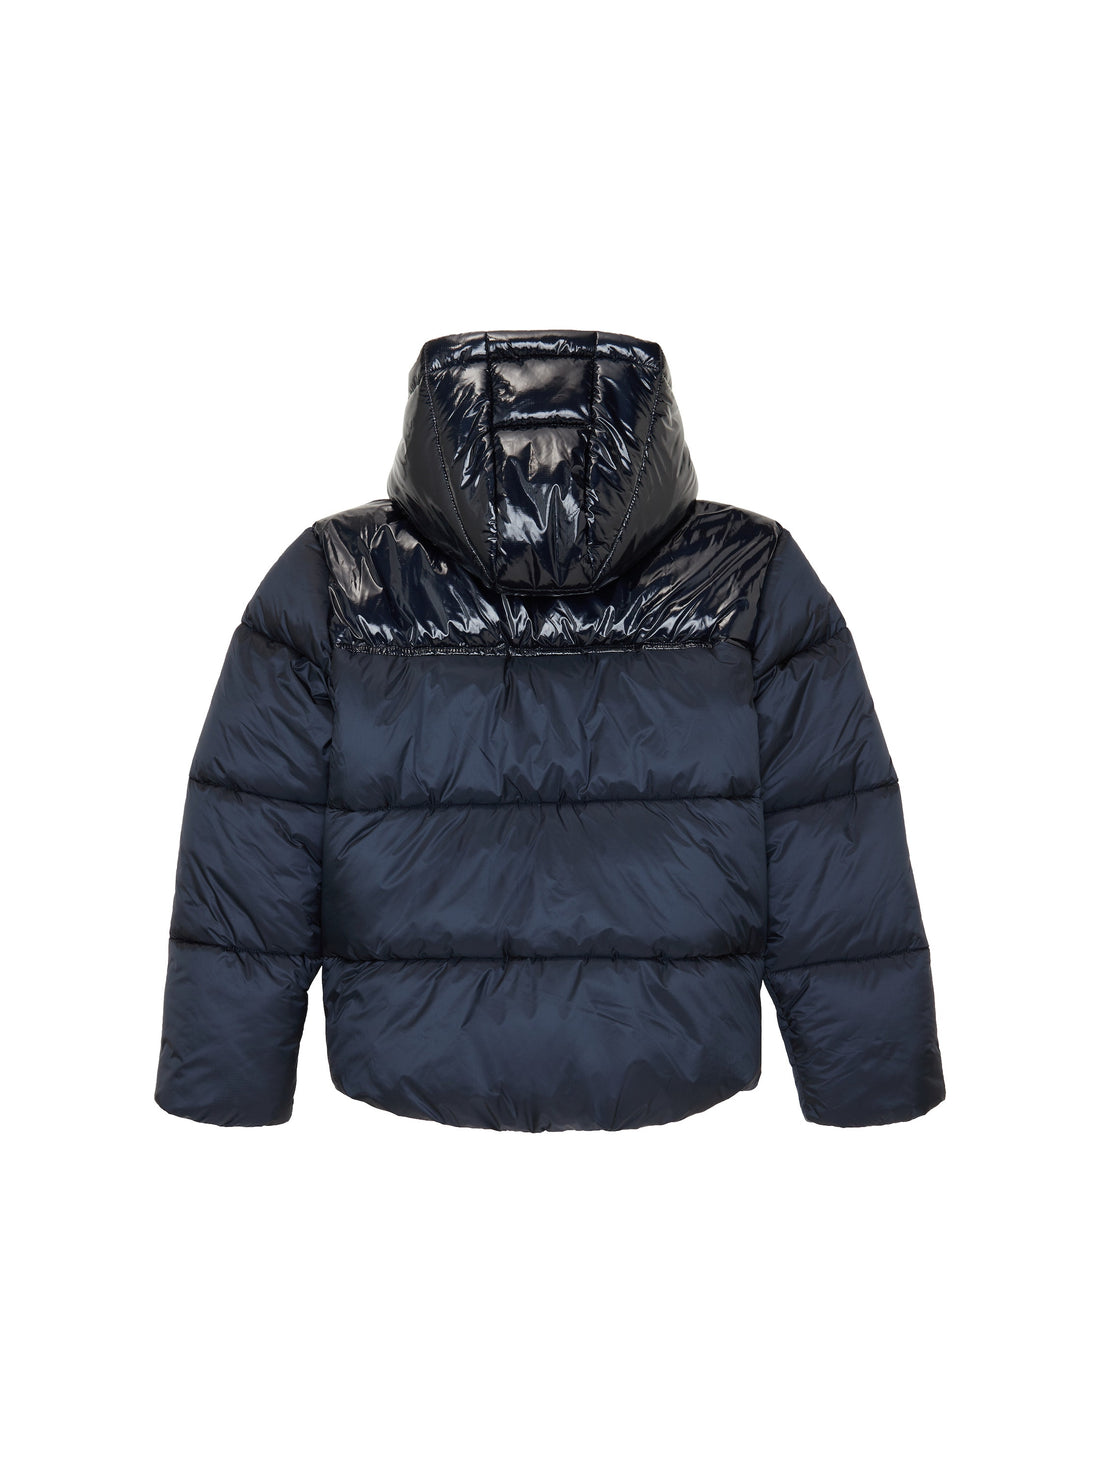 Puffer Jacket With Hood_1038493_10668_02